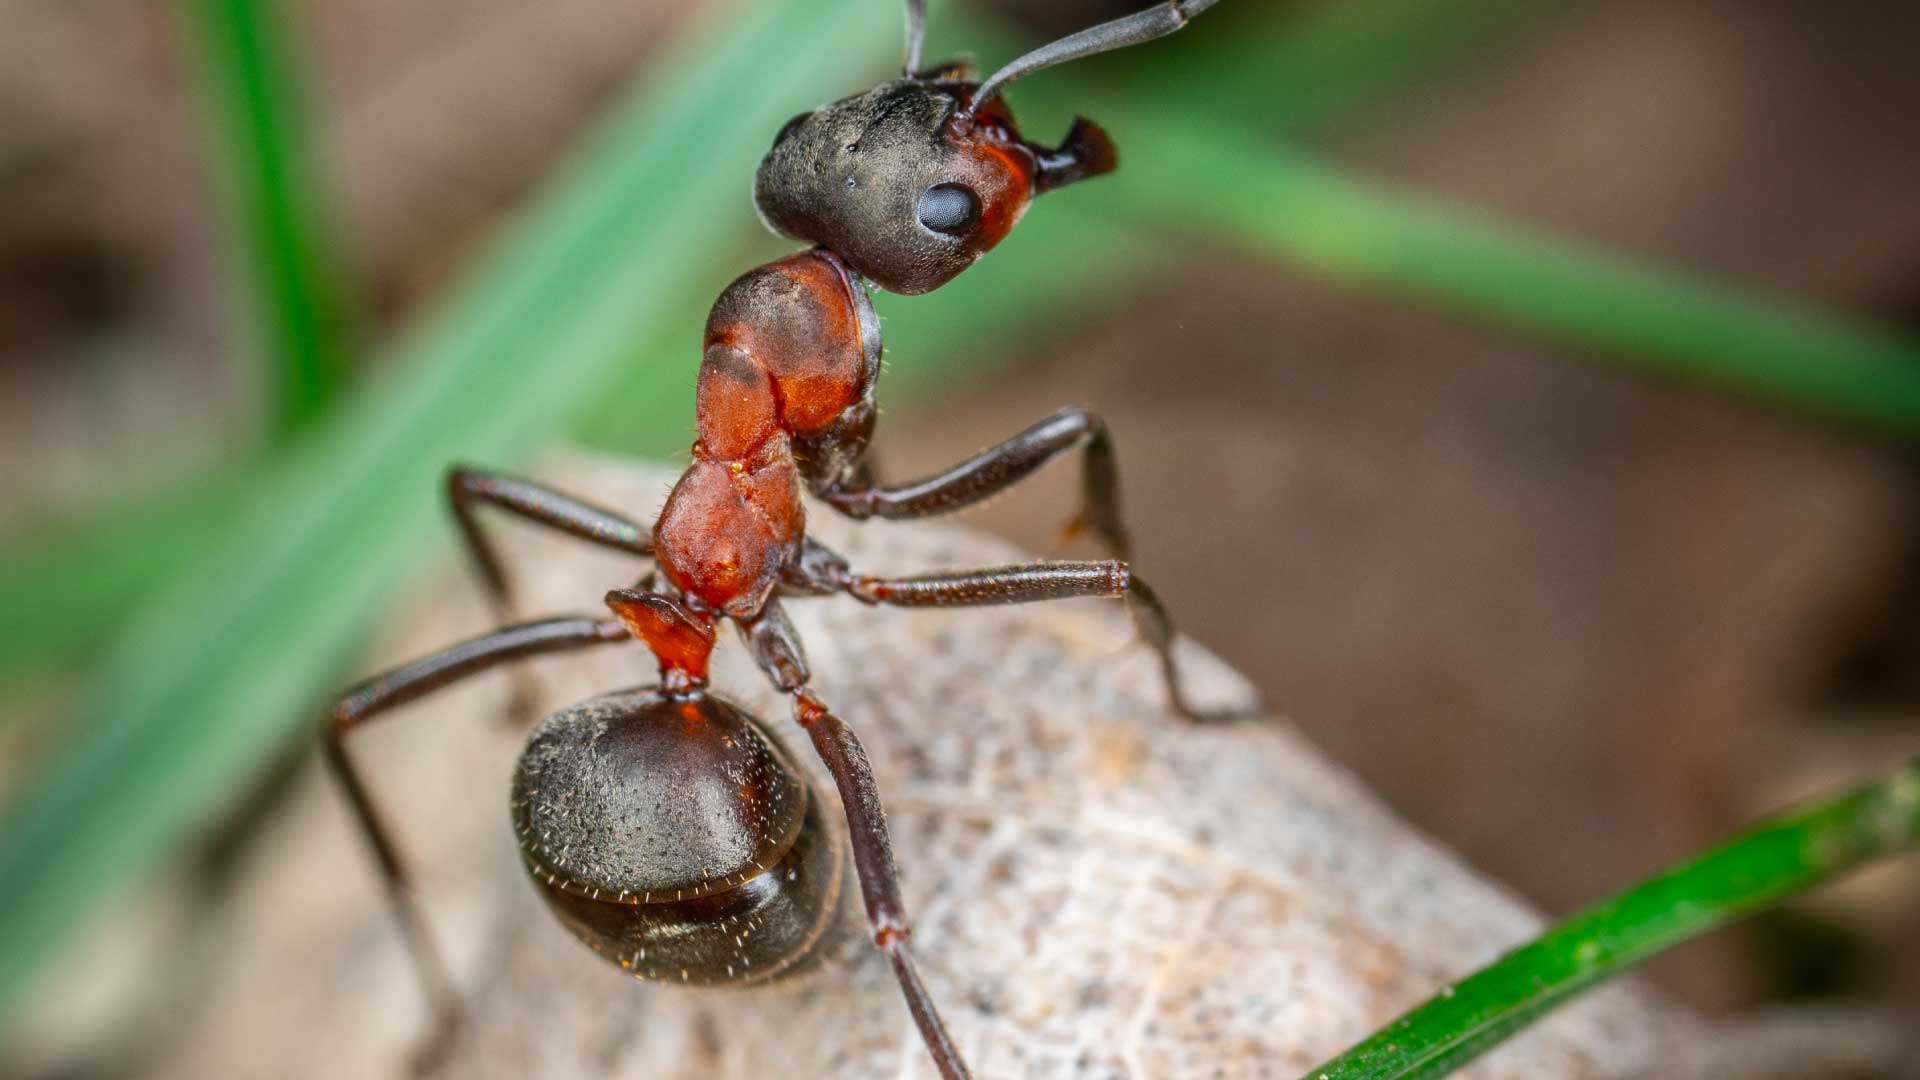 The Red Ants Have Reached Europe: What You Need to Know